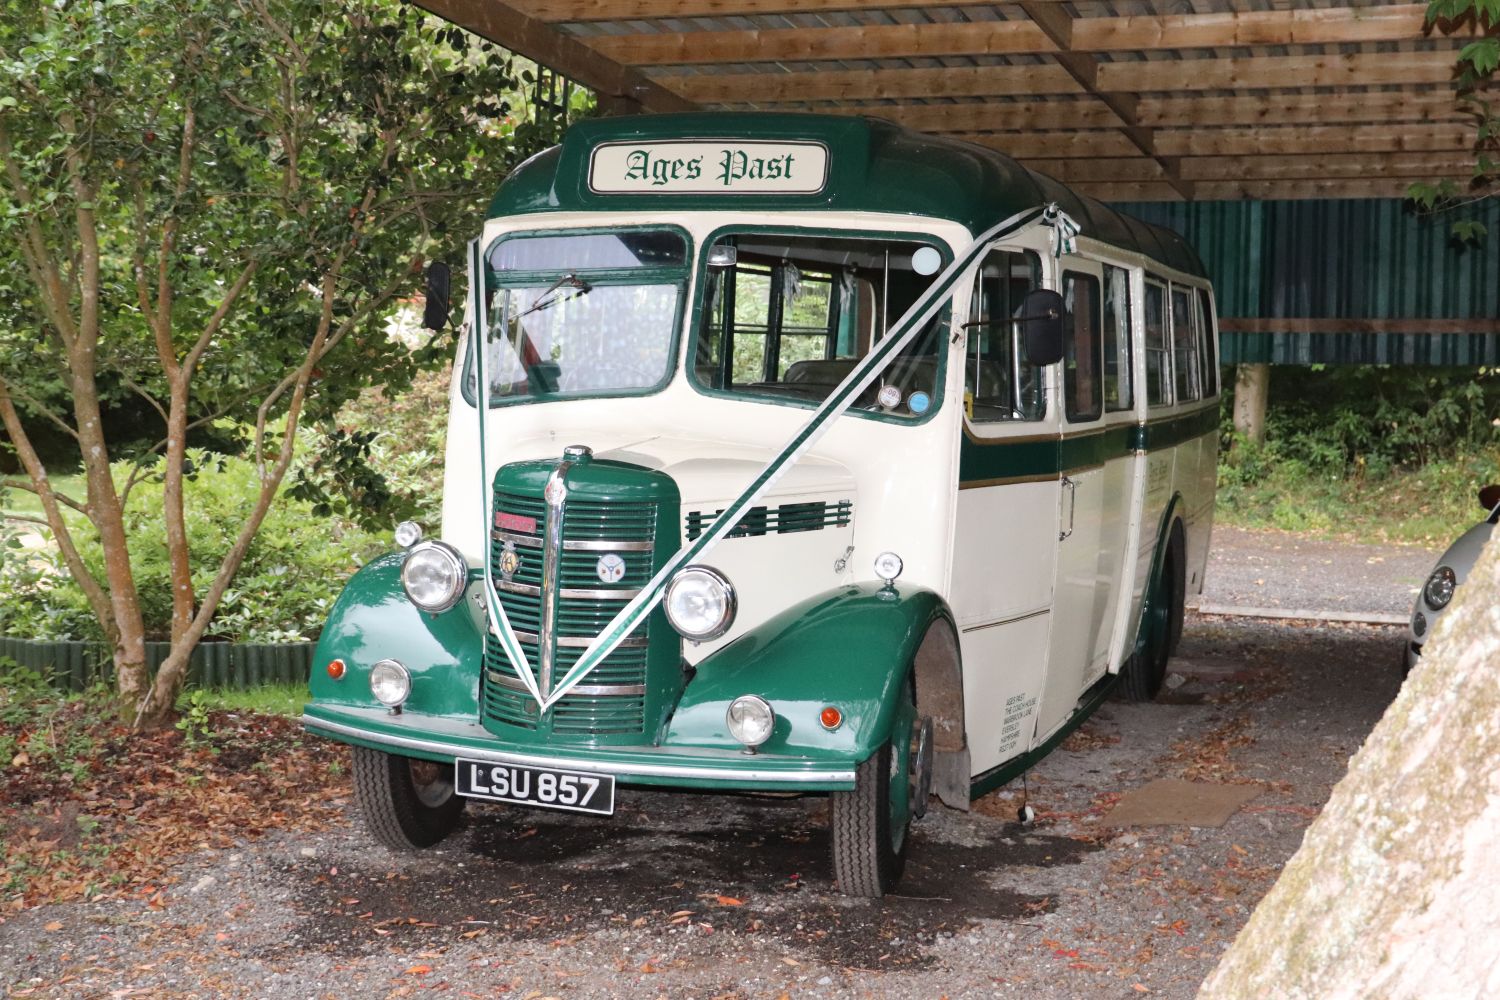 New in June 1947 to Jersey Motor Transport was this Mulliner bus bodied Bedford OB which originally had 32 seats but now has 28